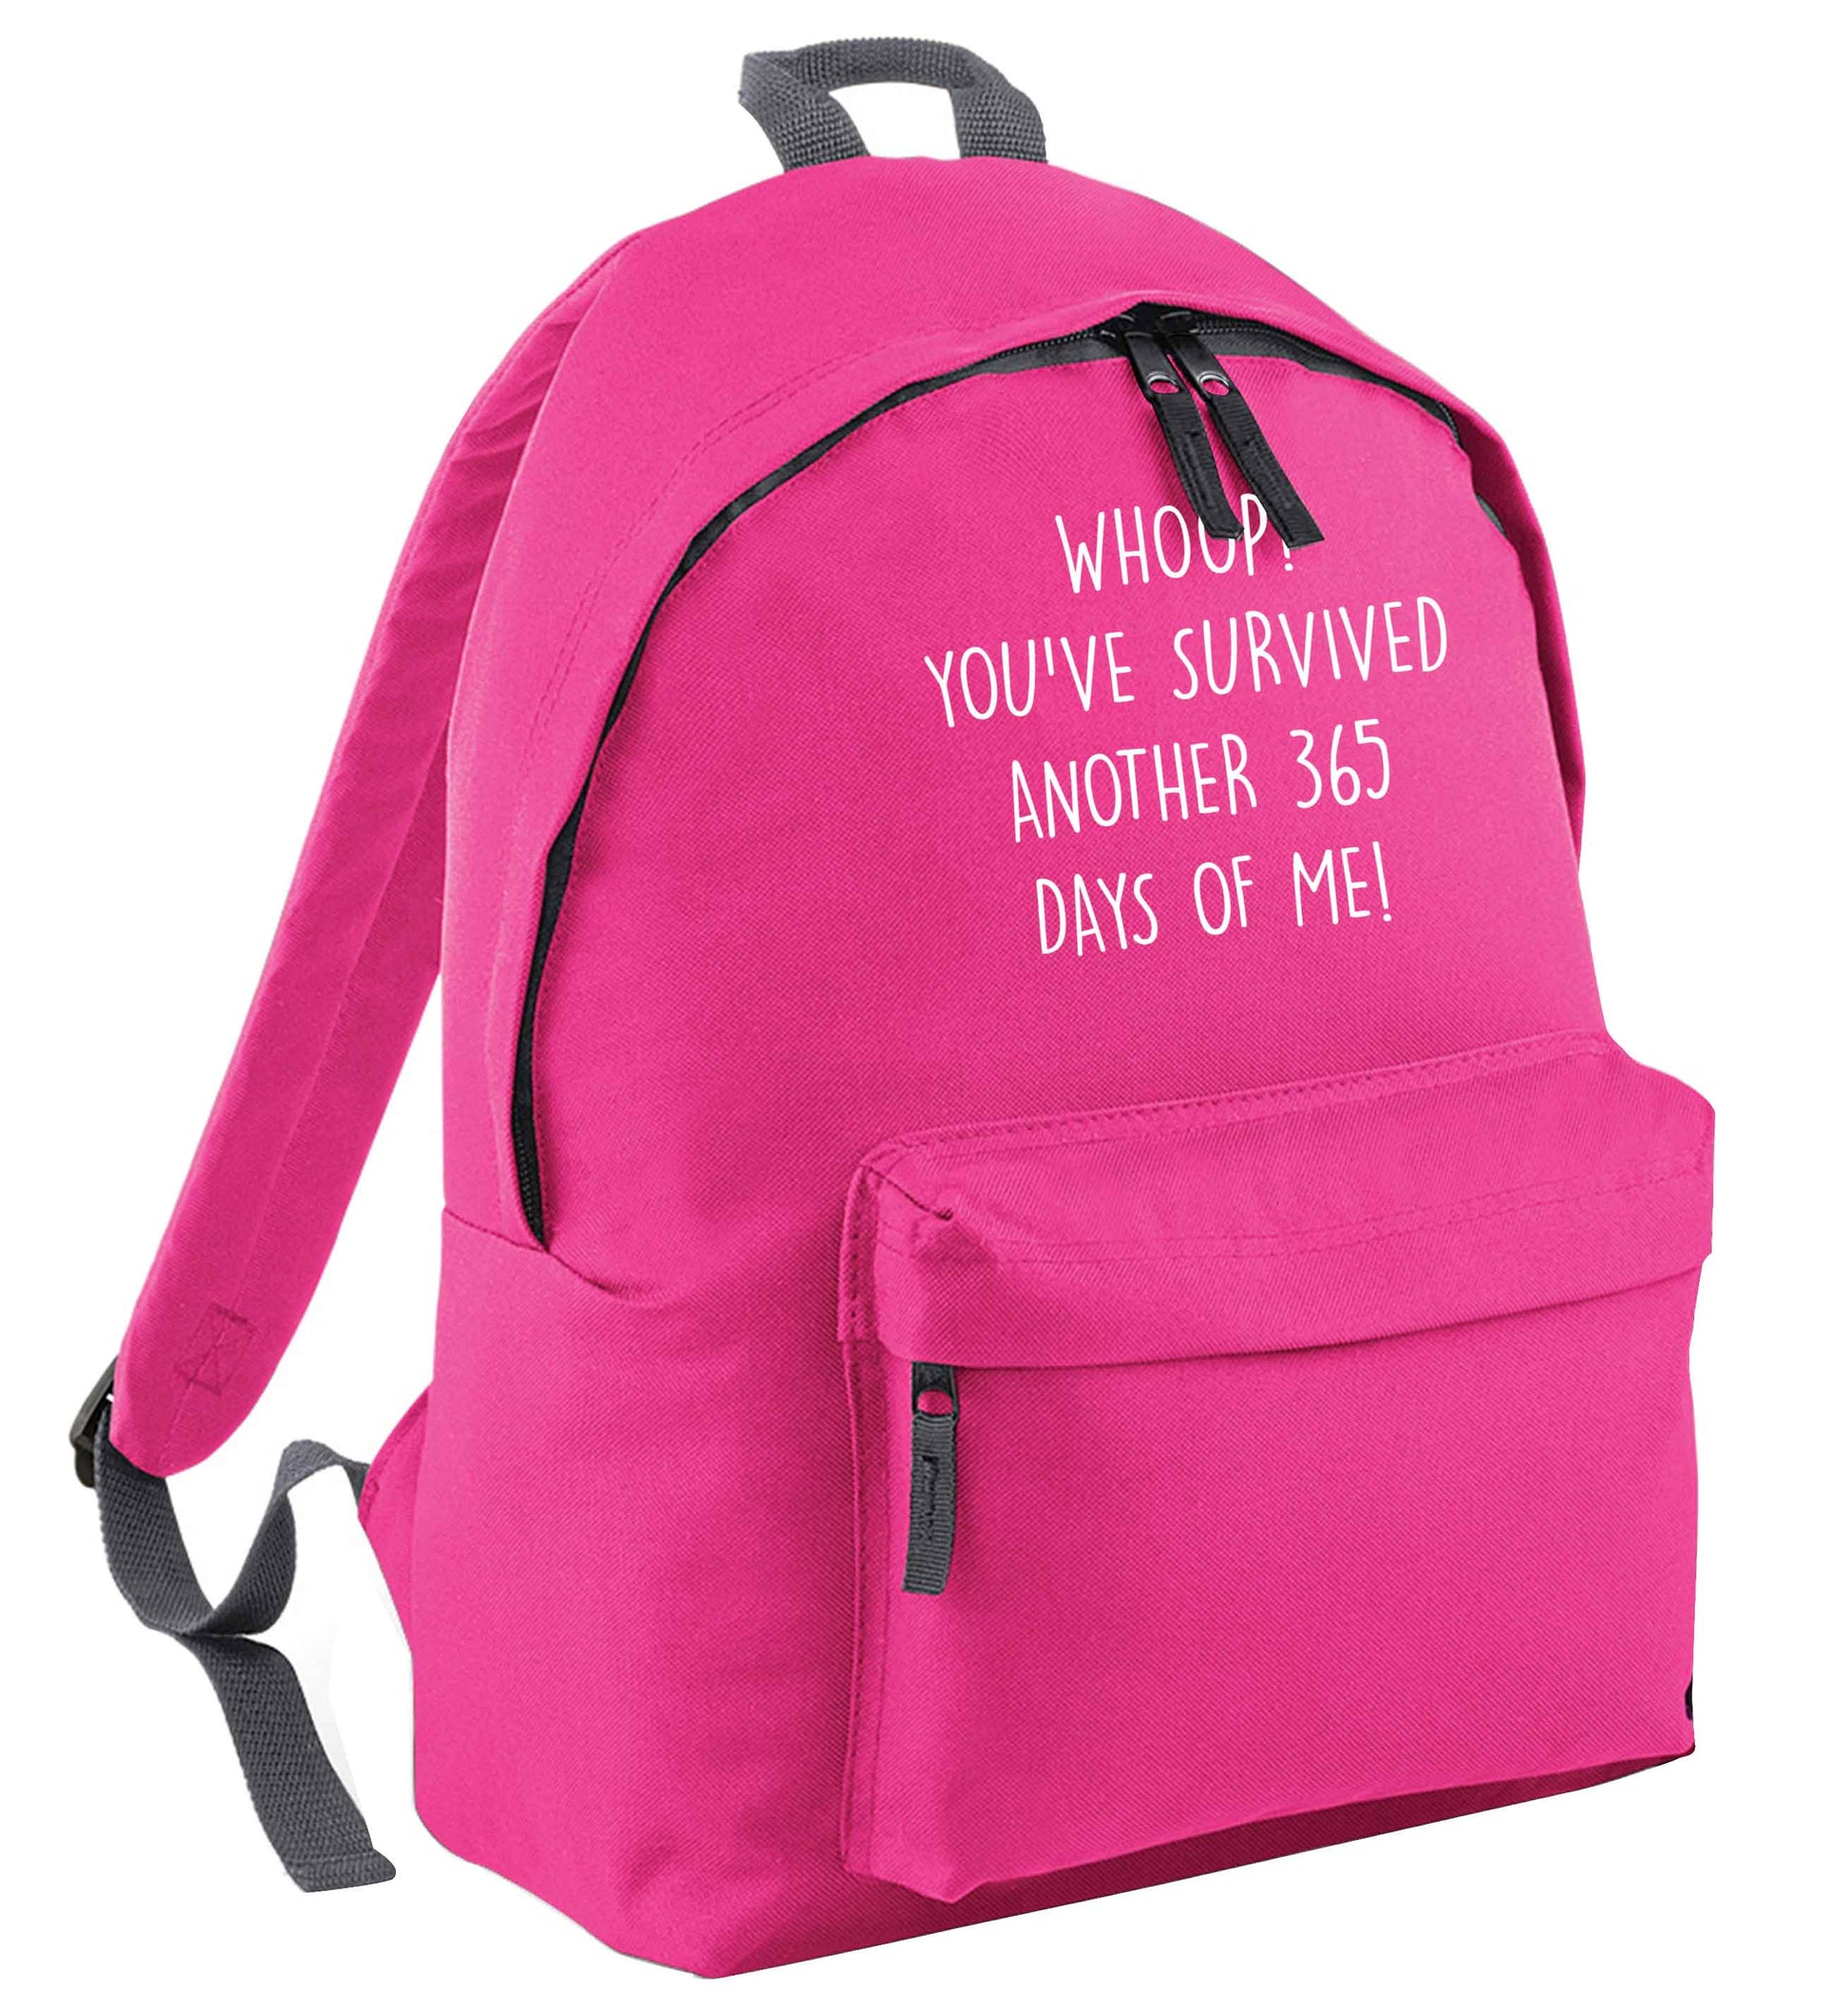 Whoop! You've survived another 365 days with me! pink adults backpack